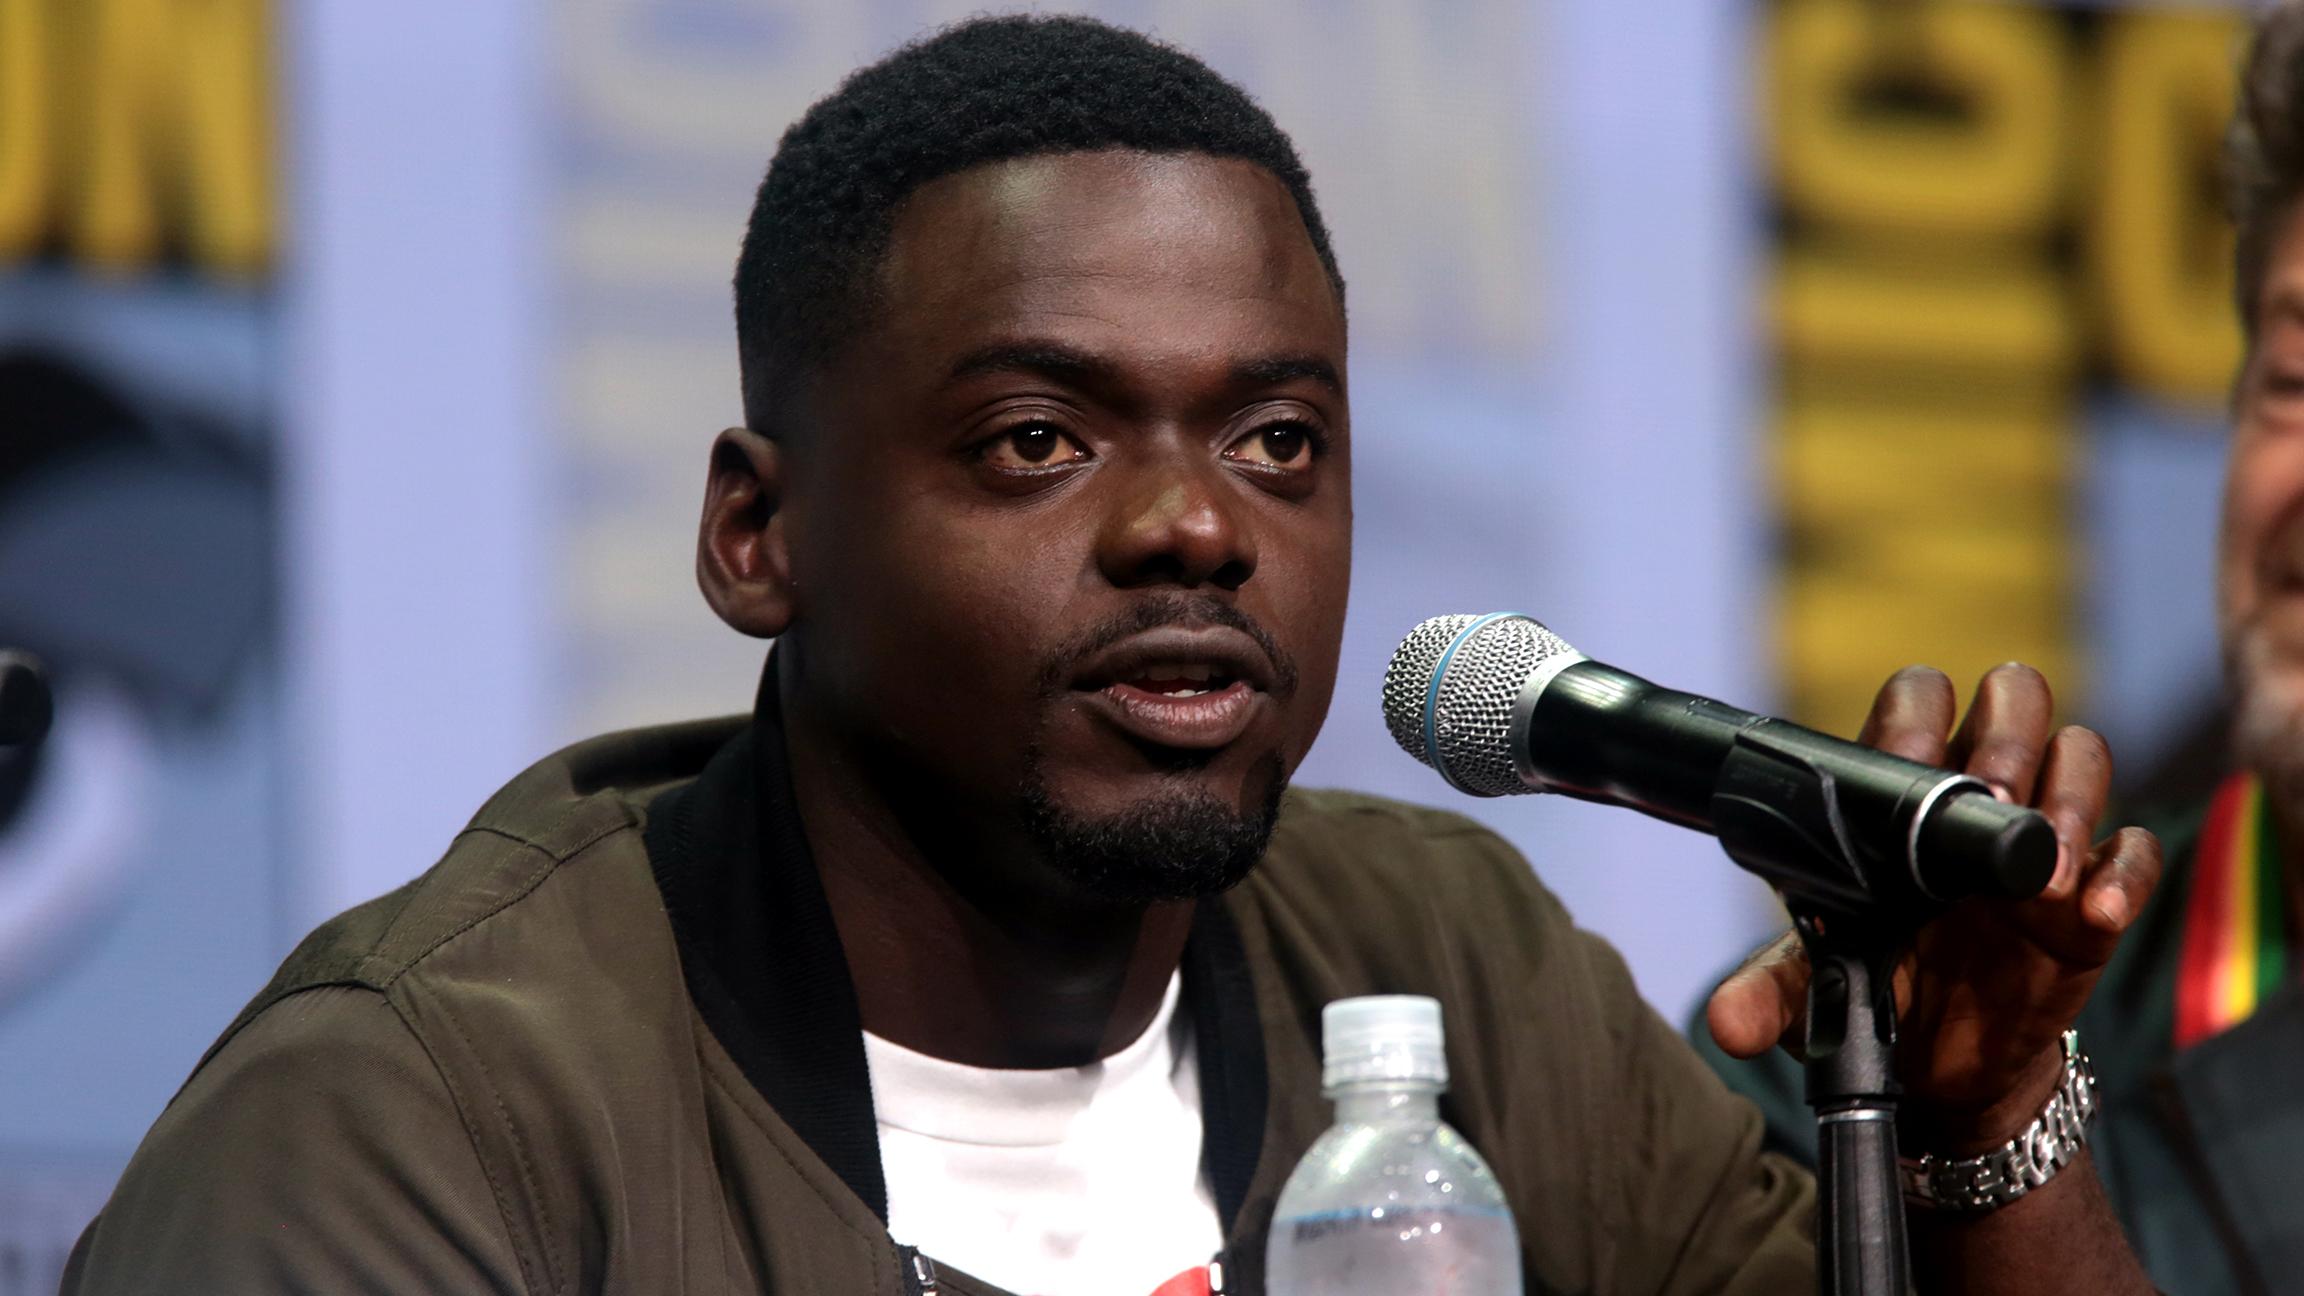 “Get Out” actor Daniel Kaluuya speaks at the 2017 San Diego Comic Con International. (Gage Skidmore / Flickr)